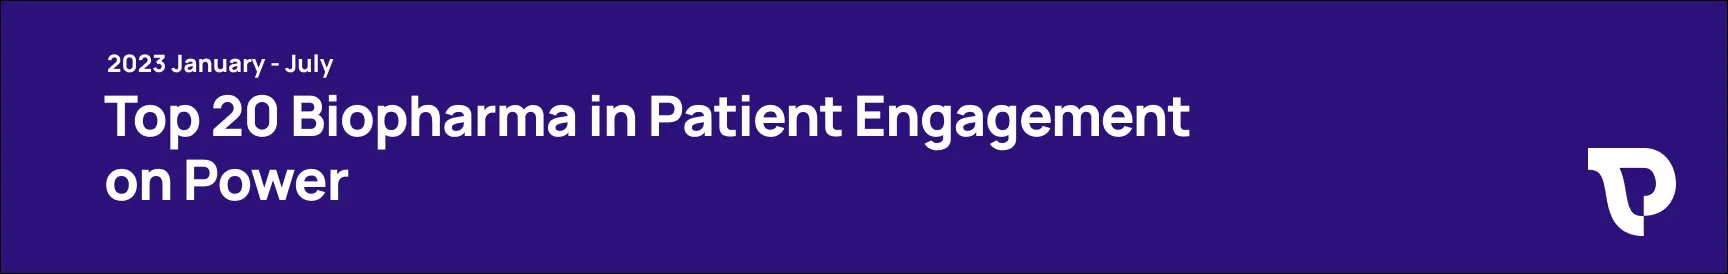 Top 20 Biopharma in Patient Engagement on Power